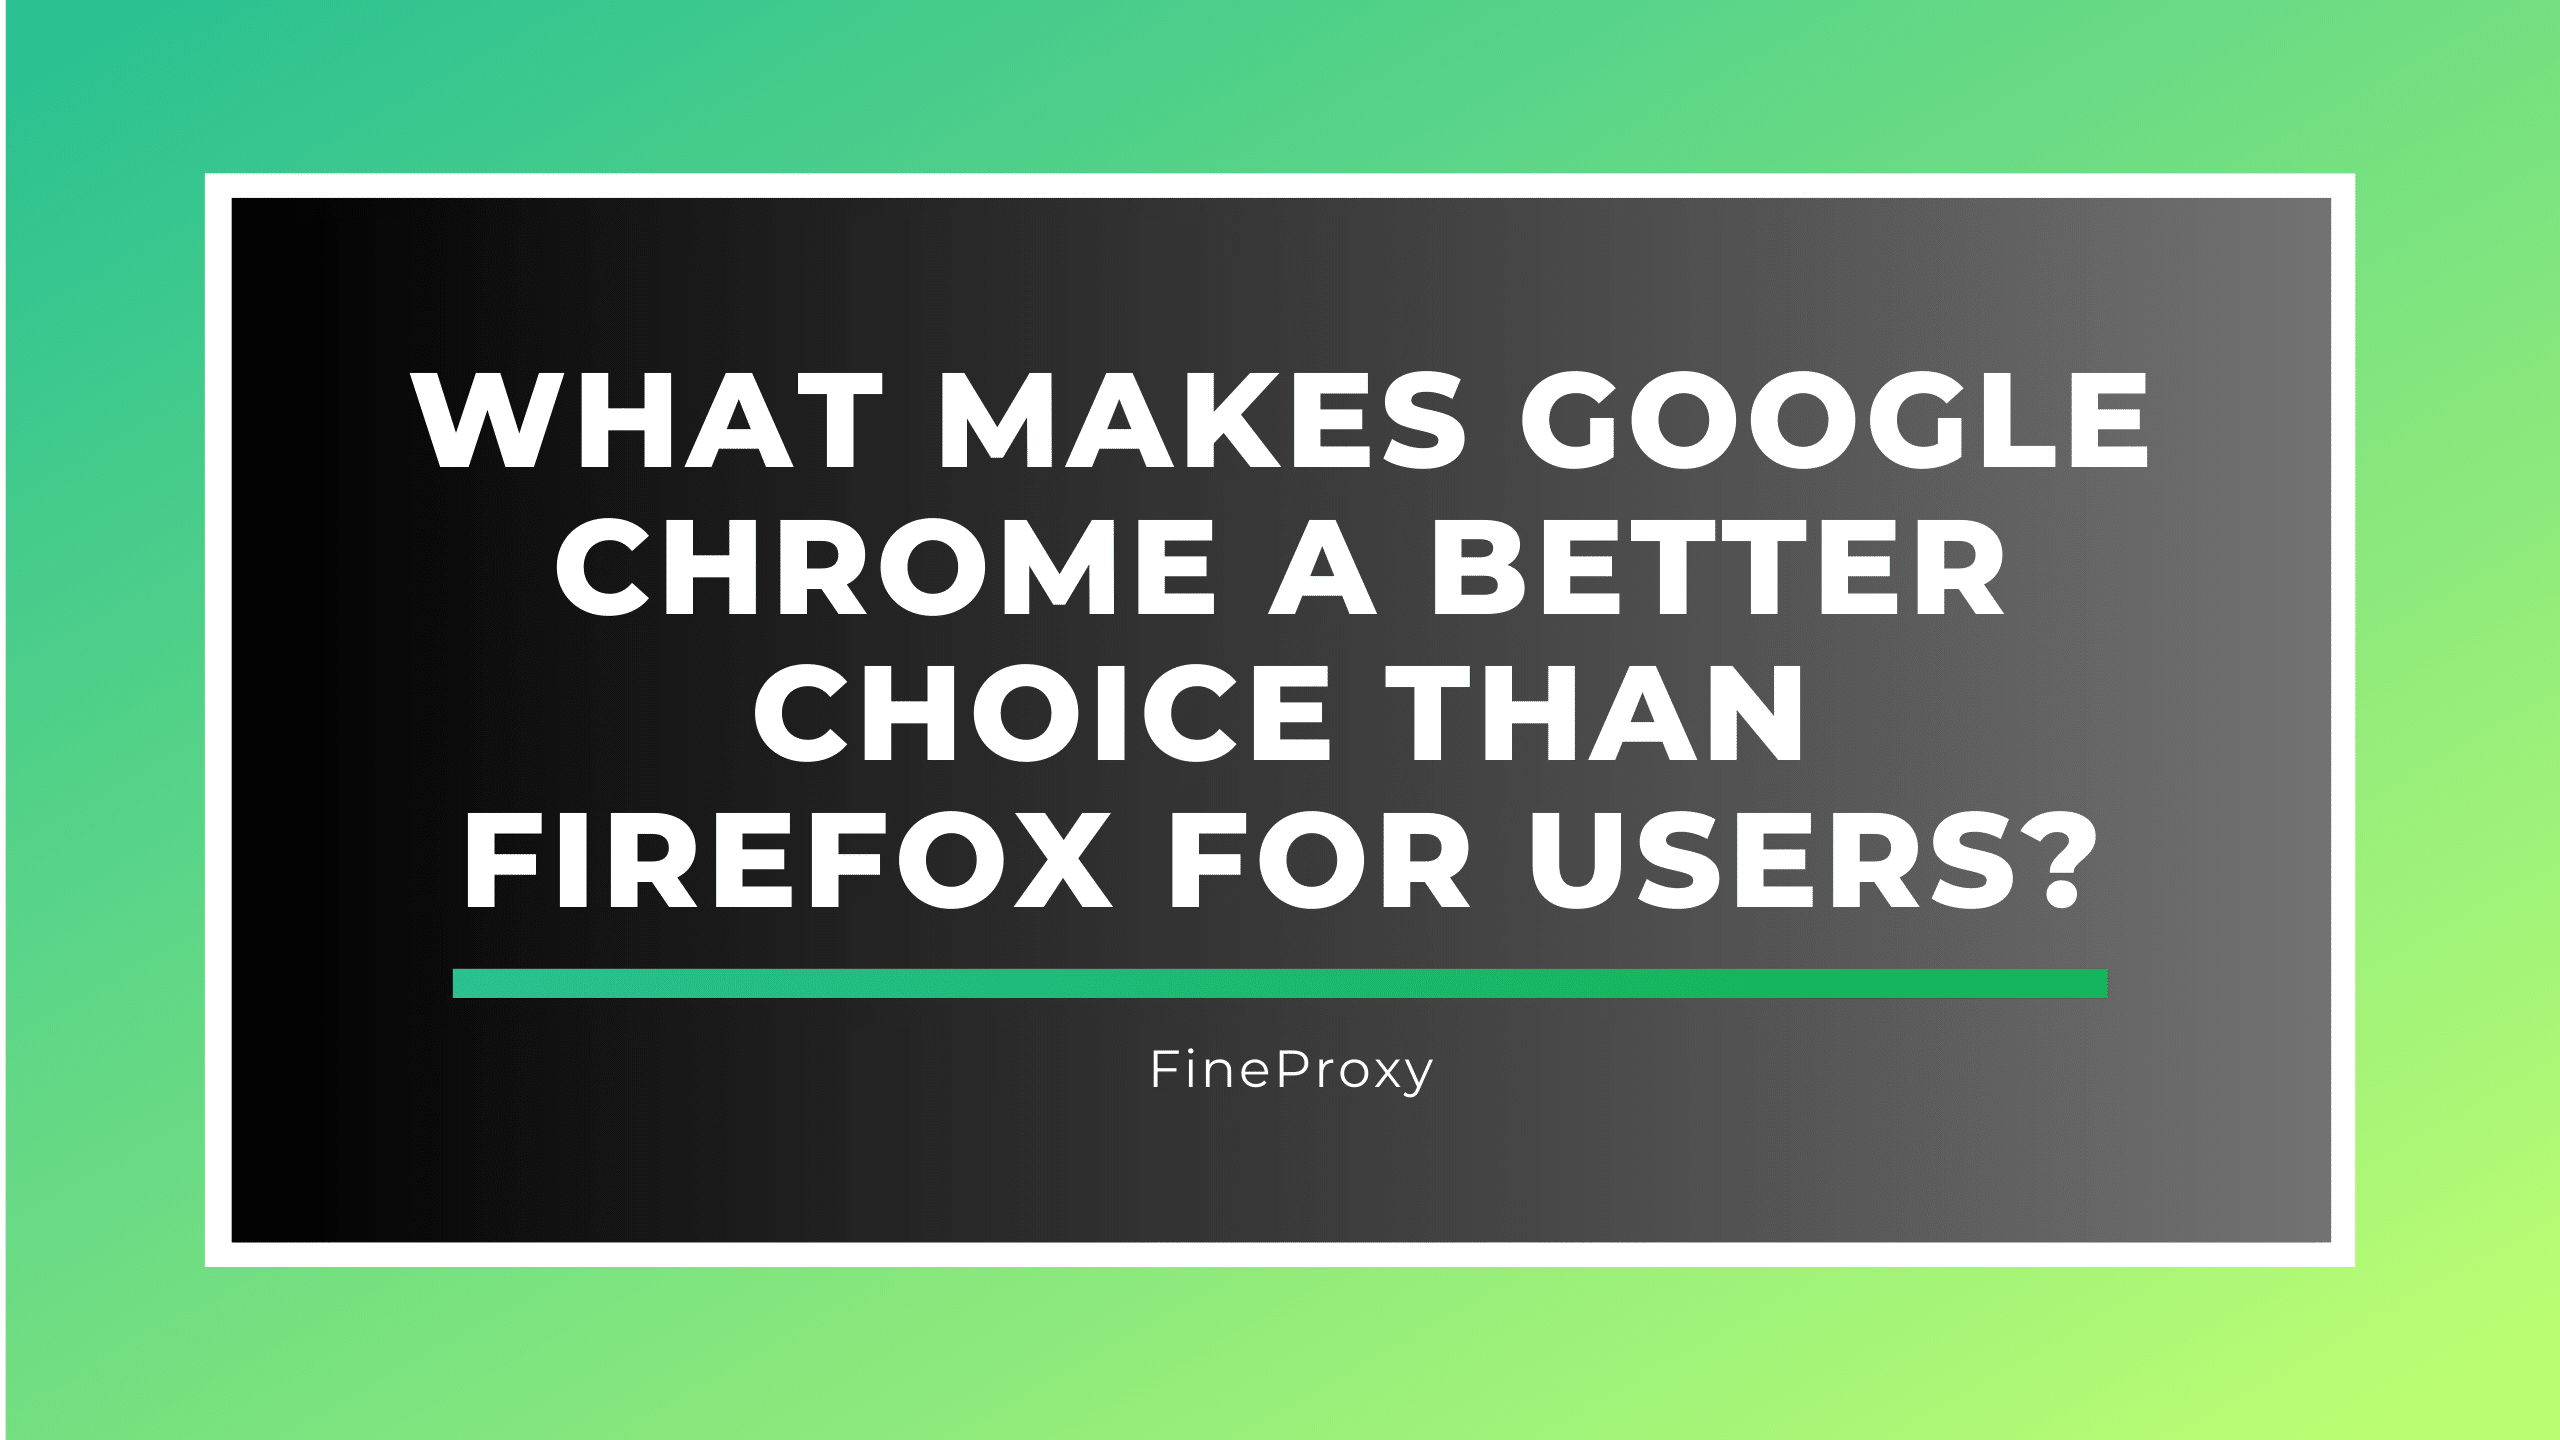 What Makes Google Chrome a Better Choice than Firefox for Users?